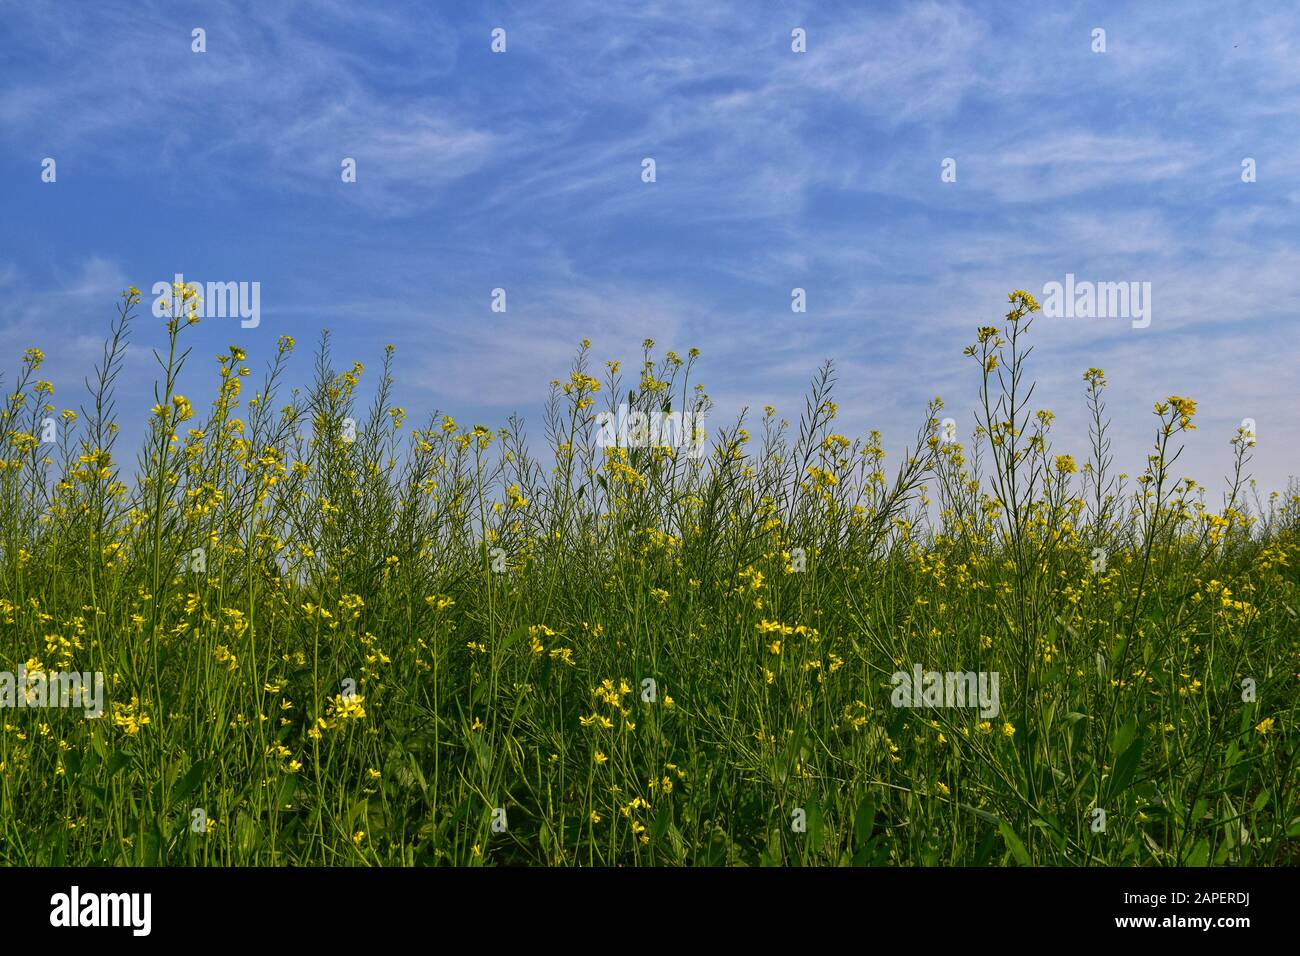 The mustard is a plant species in the genera Brassica. The group of little blurred yellow flowers of mustard with blue sky. Stock Photo